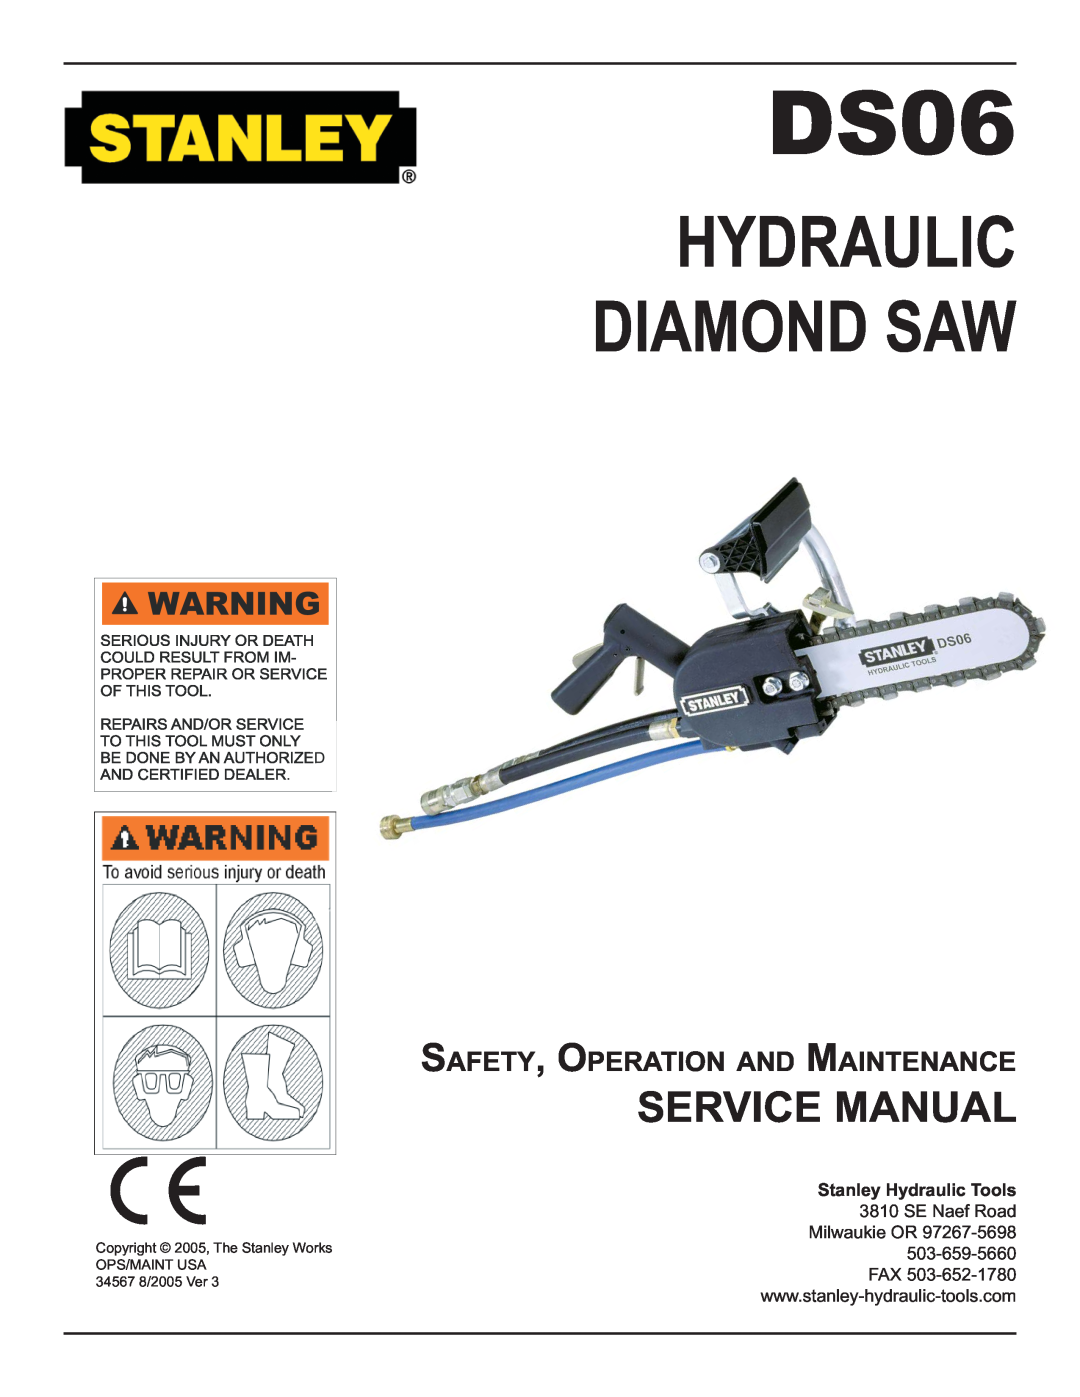 Stanley Black & Decker DS06 user manual User Manual, Safety, Operation and Maintenance, Hydraulic Diamond Saw 